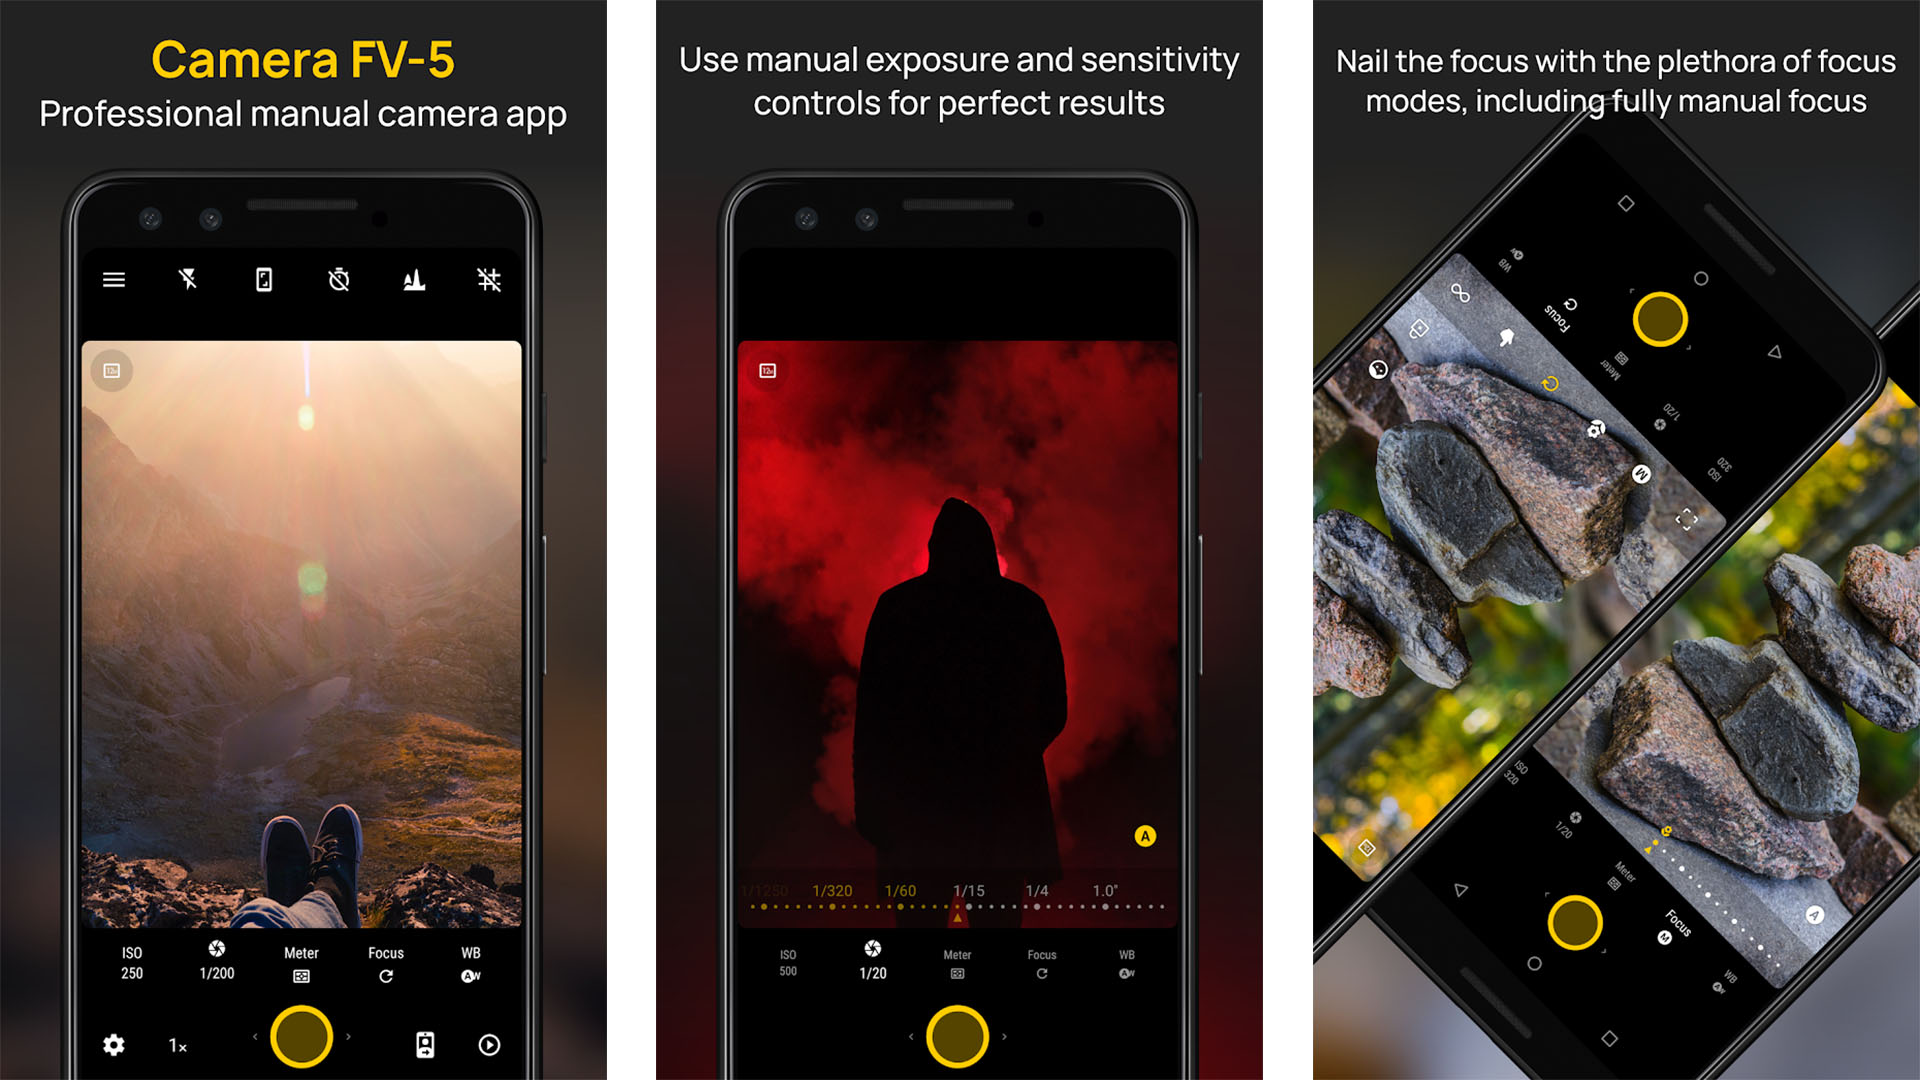 The 15 best camera apps for Android in 2022